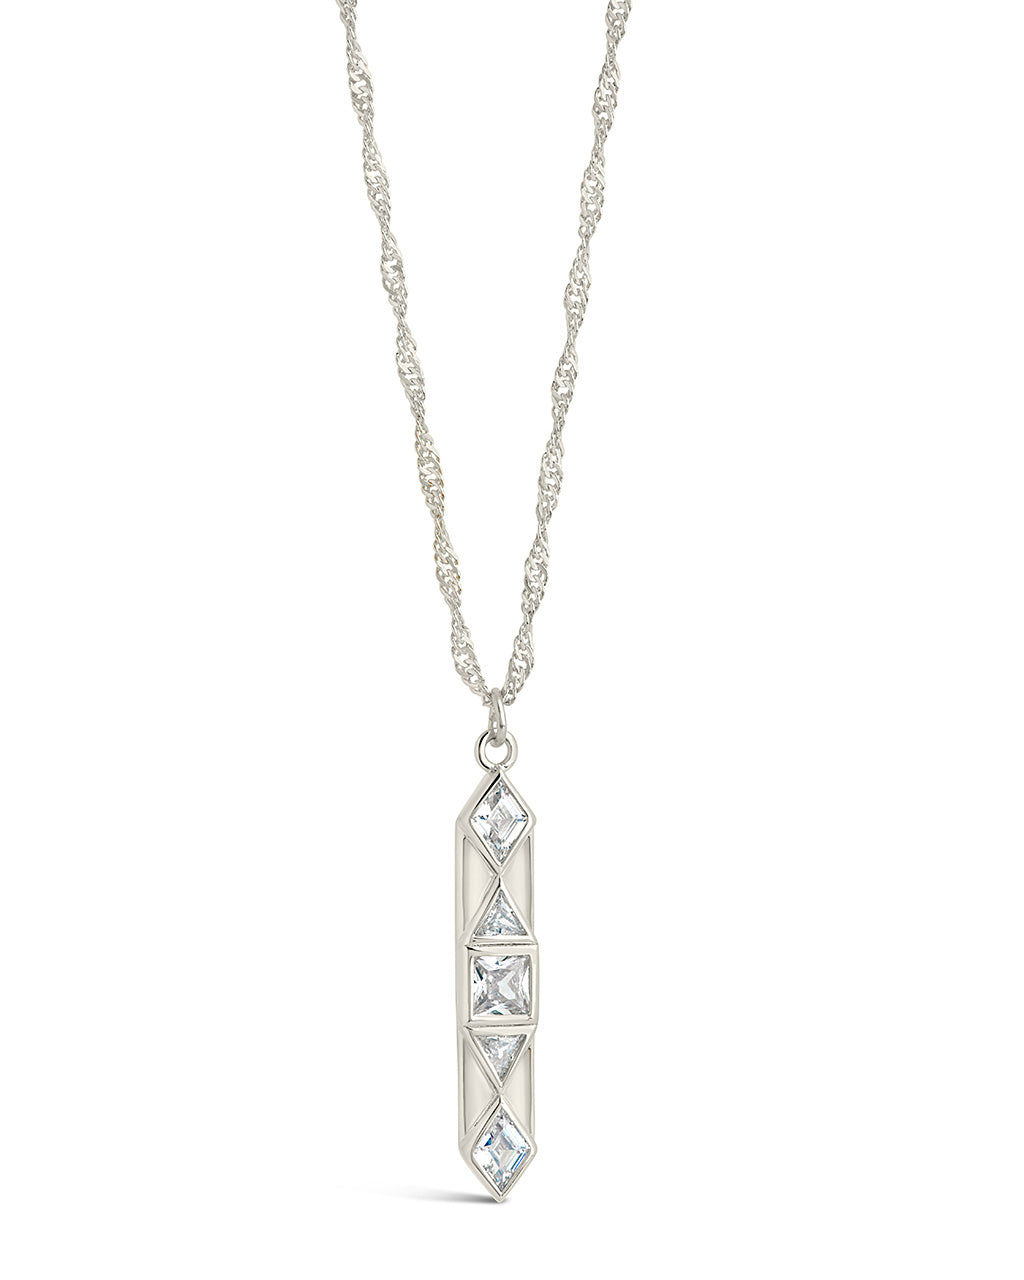 Romilly Pendant Necklace Sterling Forever Silver 